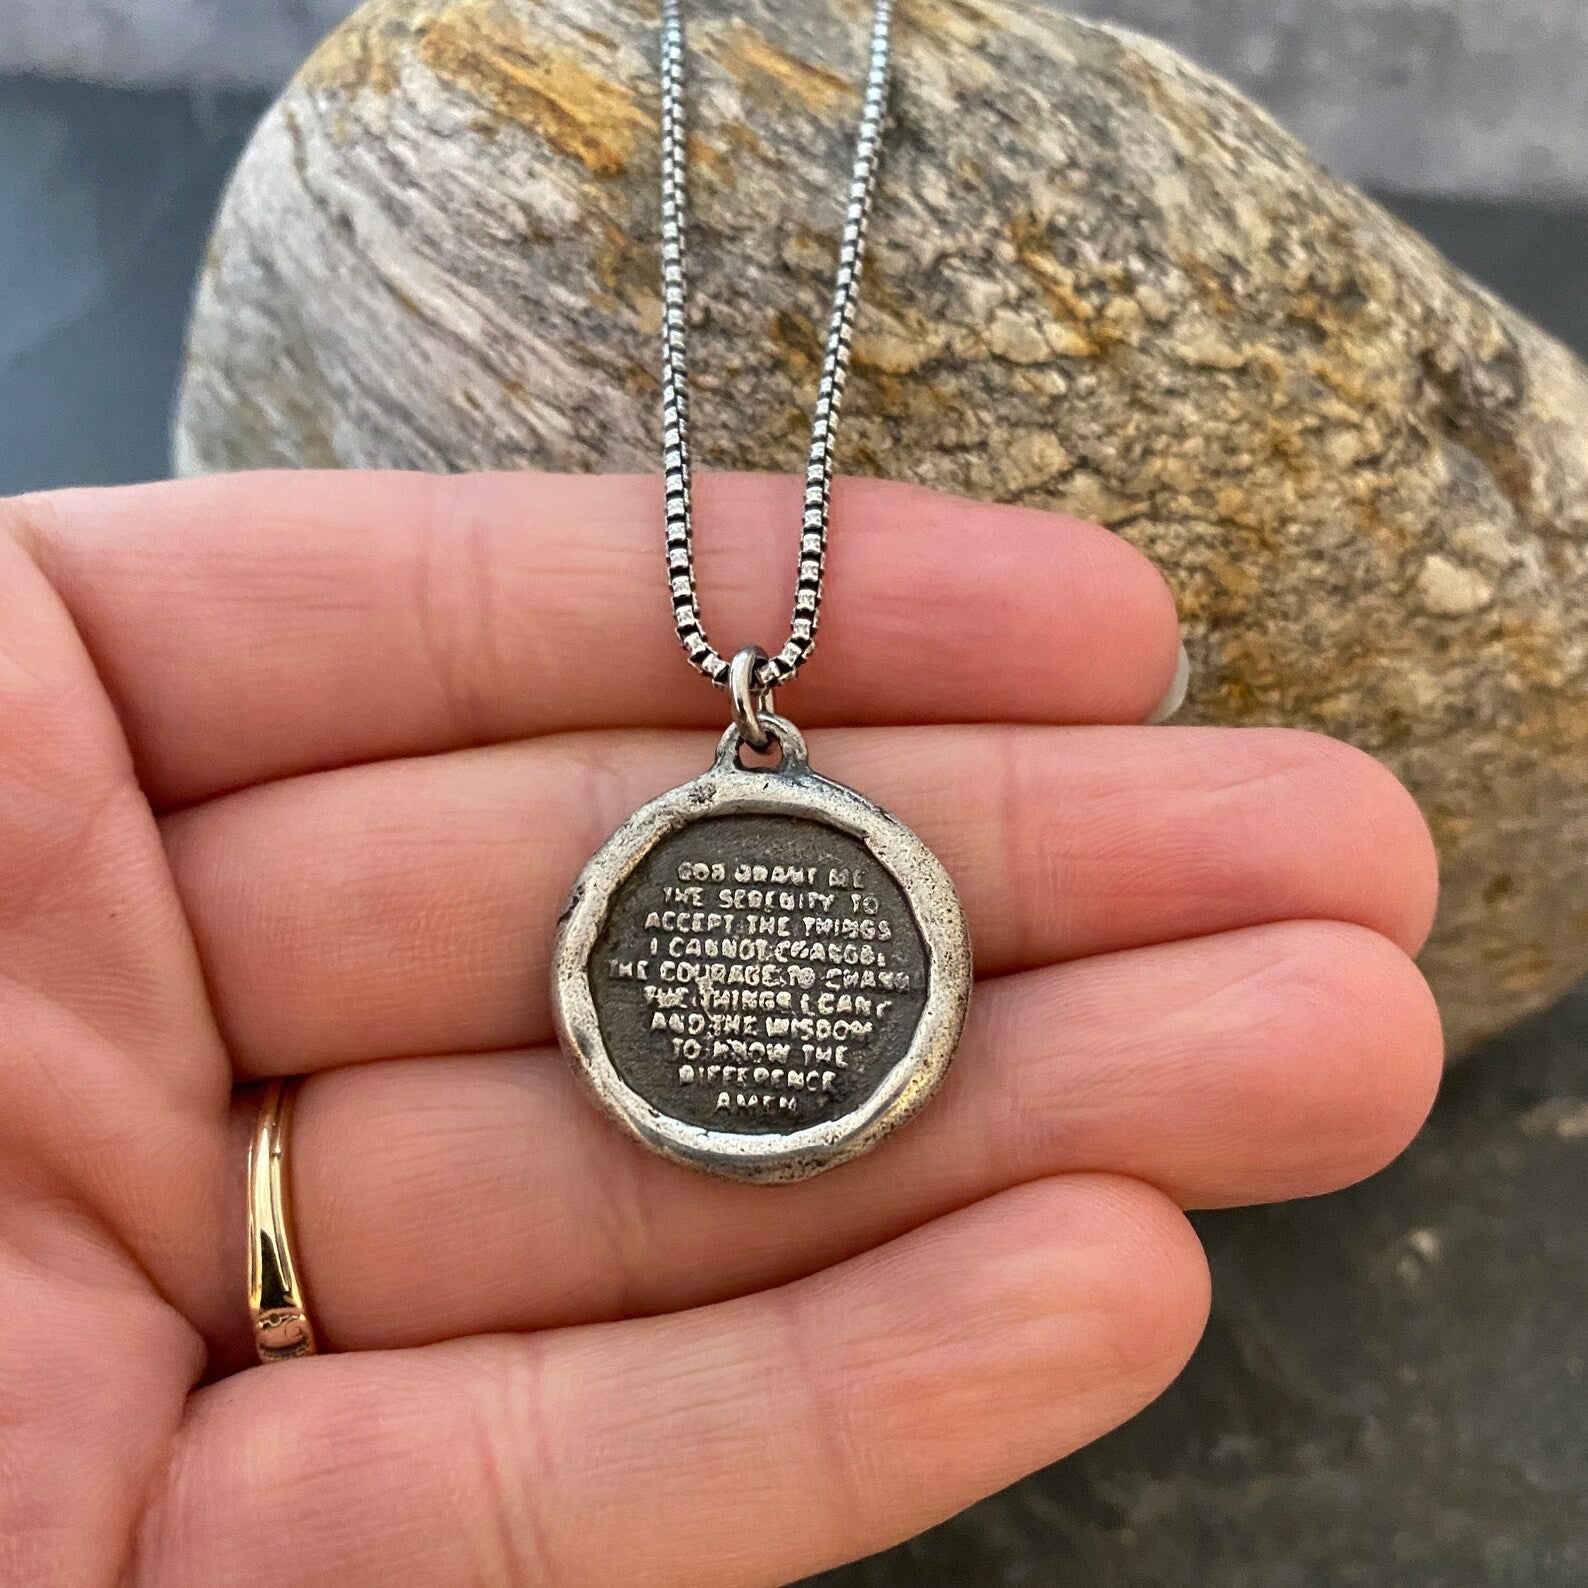 NOW in Sterling Silver - Serenity Prayer Necklace, Men's Soldered Pendant with Cross, Unisex Jewelry Gift, Faith, SS-018